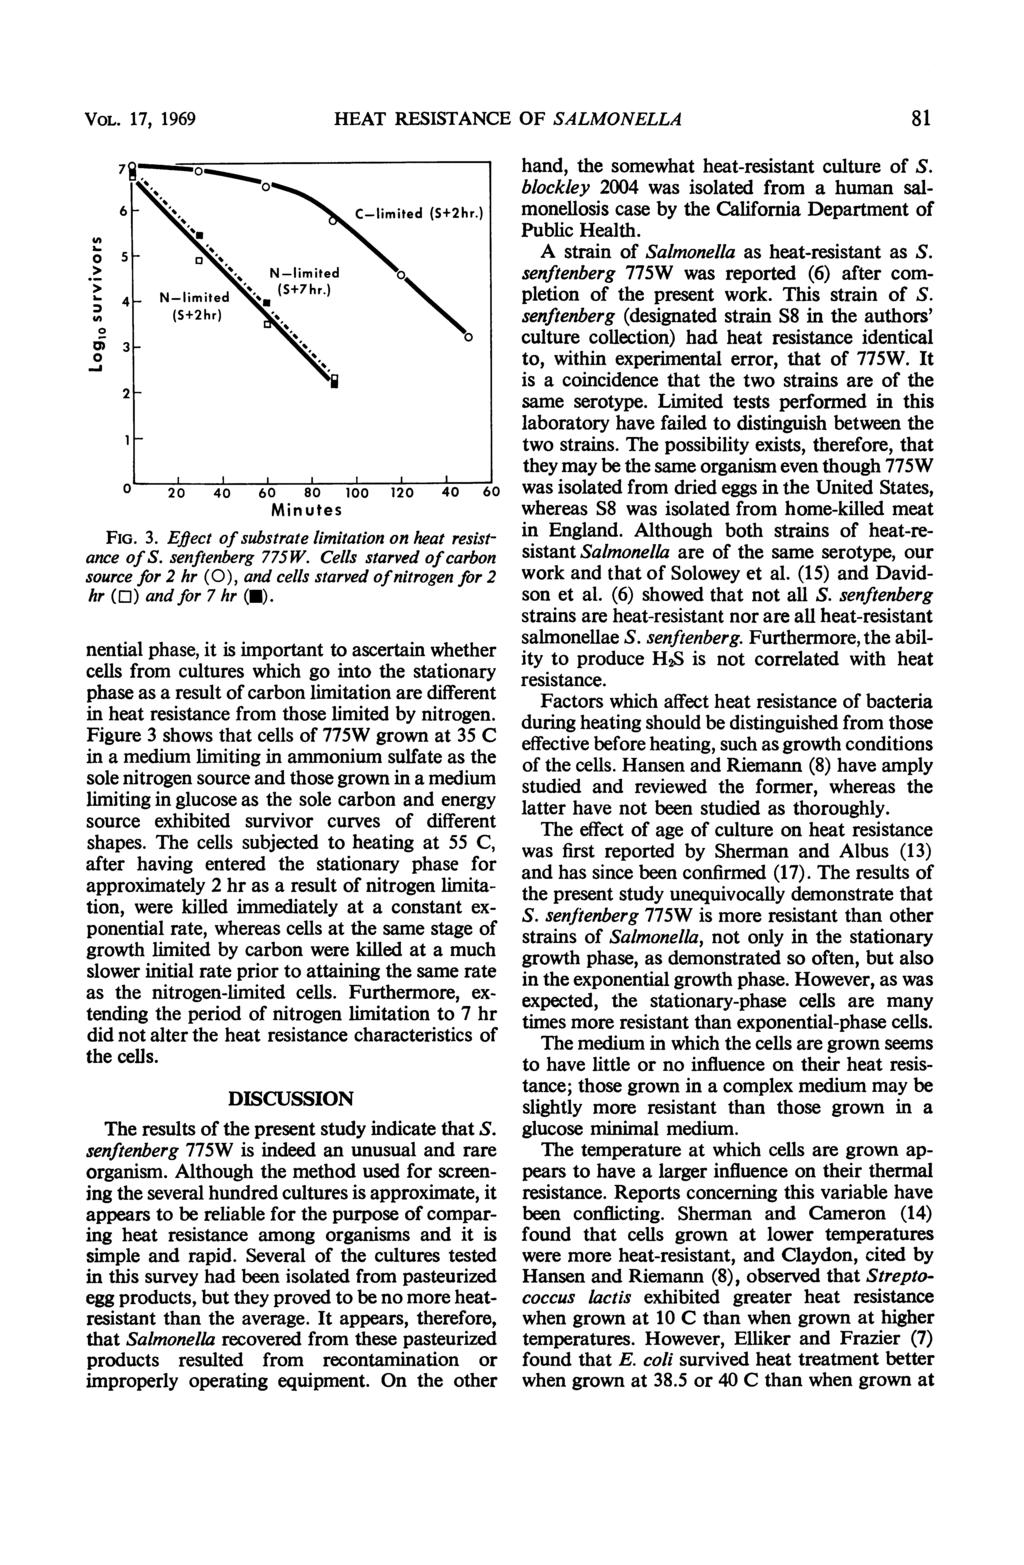 VOL. 17, 1969 5 0 N-limited >4 N-limited (S+7kr.) (S+2hr) o 3 2 0 20 40 60 80 100 120 40 60 Minutes FIG. 3. Eject of substrate limitation on heat resistance of S. senftenberg 775W.